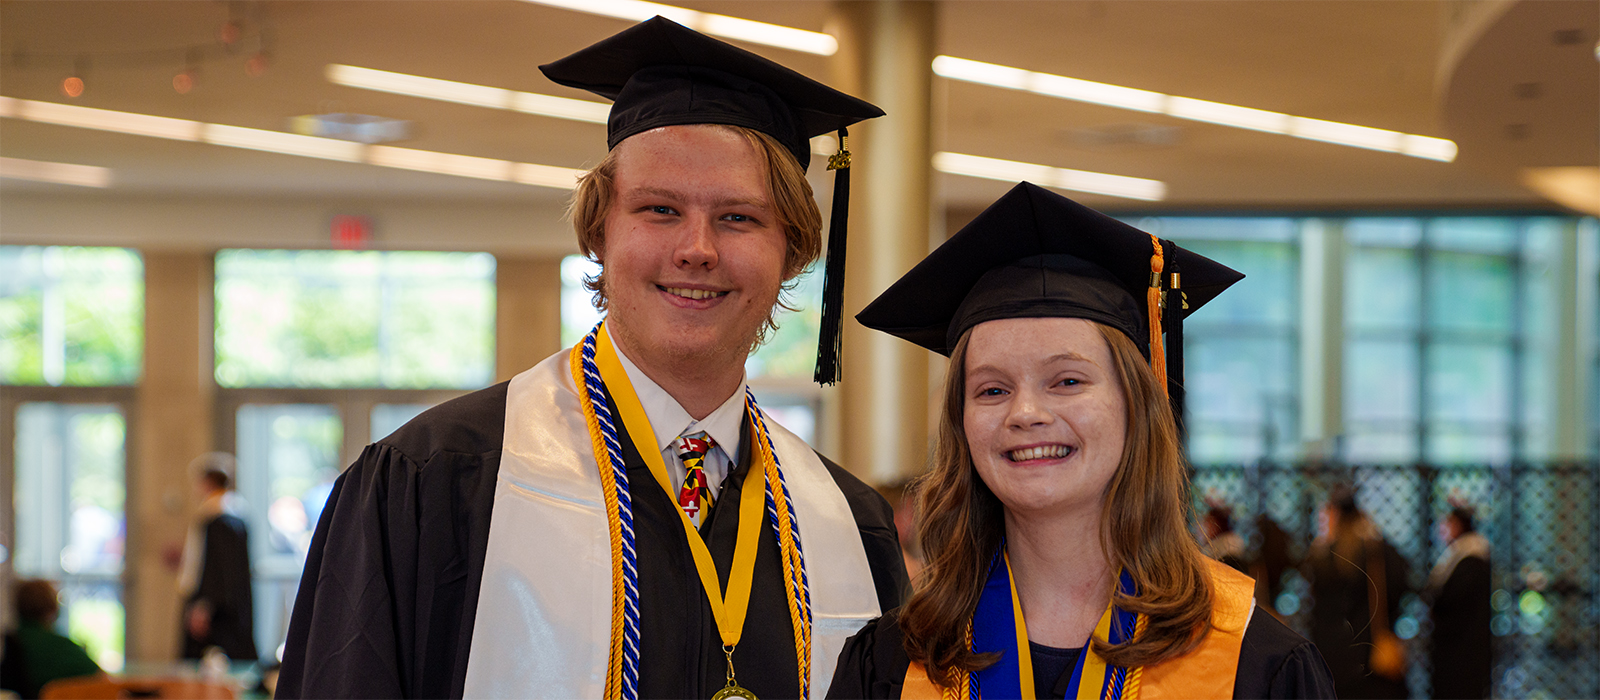 Students Lanie Lilly and William Britz at Carroll Community College